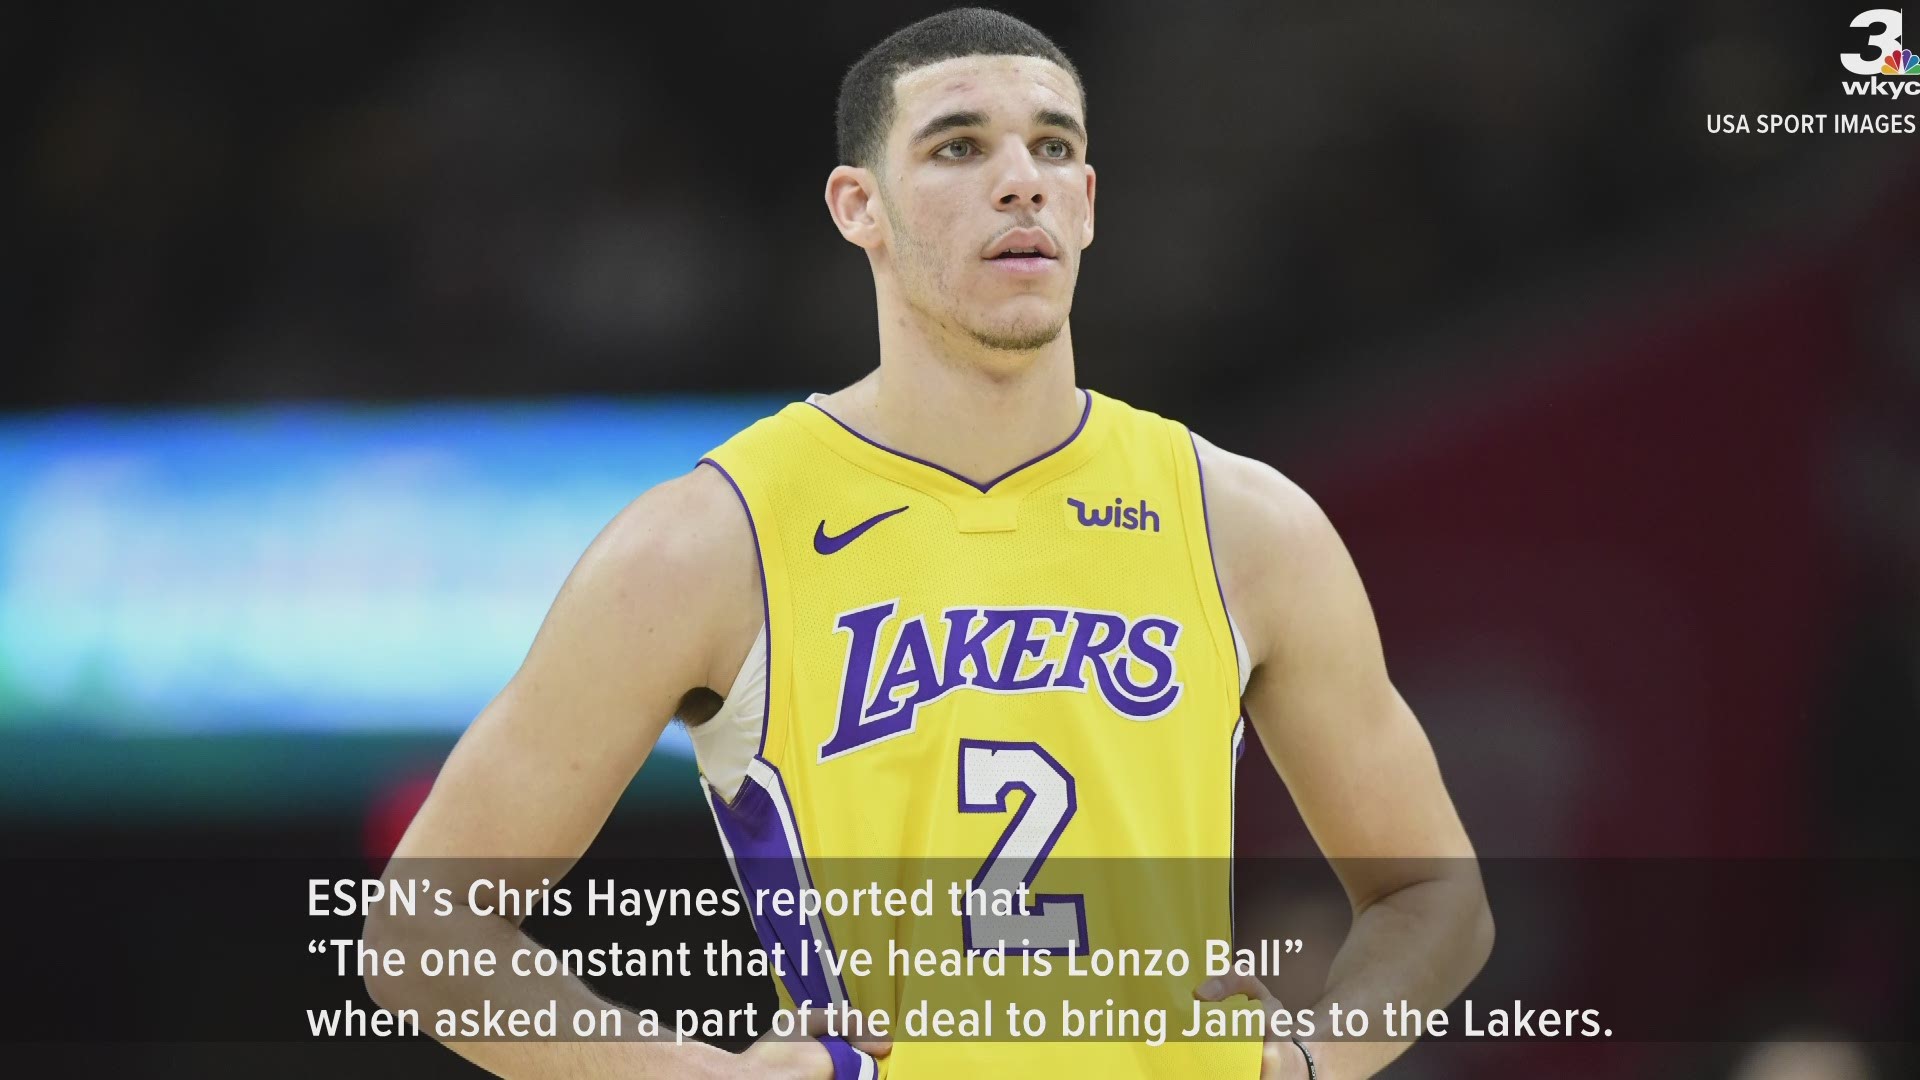 REPORT: Lonzo Ball out if Cleveland Cavaliers SF LeBron James joins Los Angeles Lakers